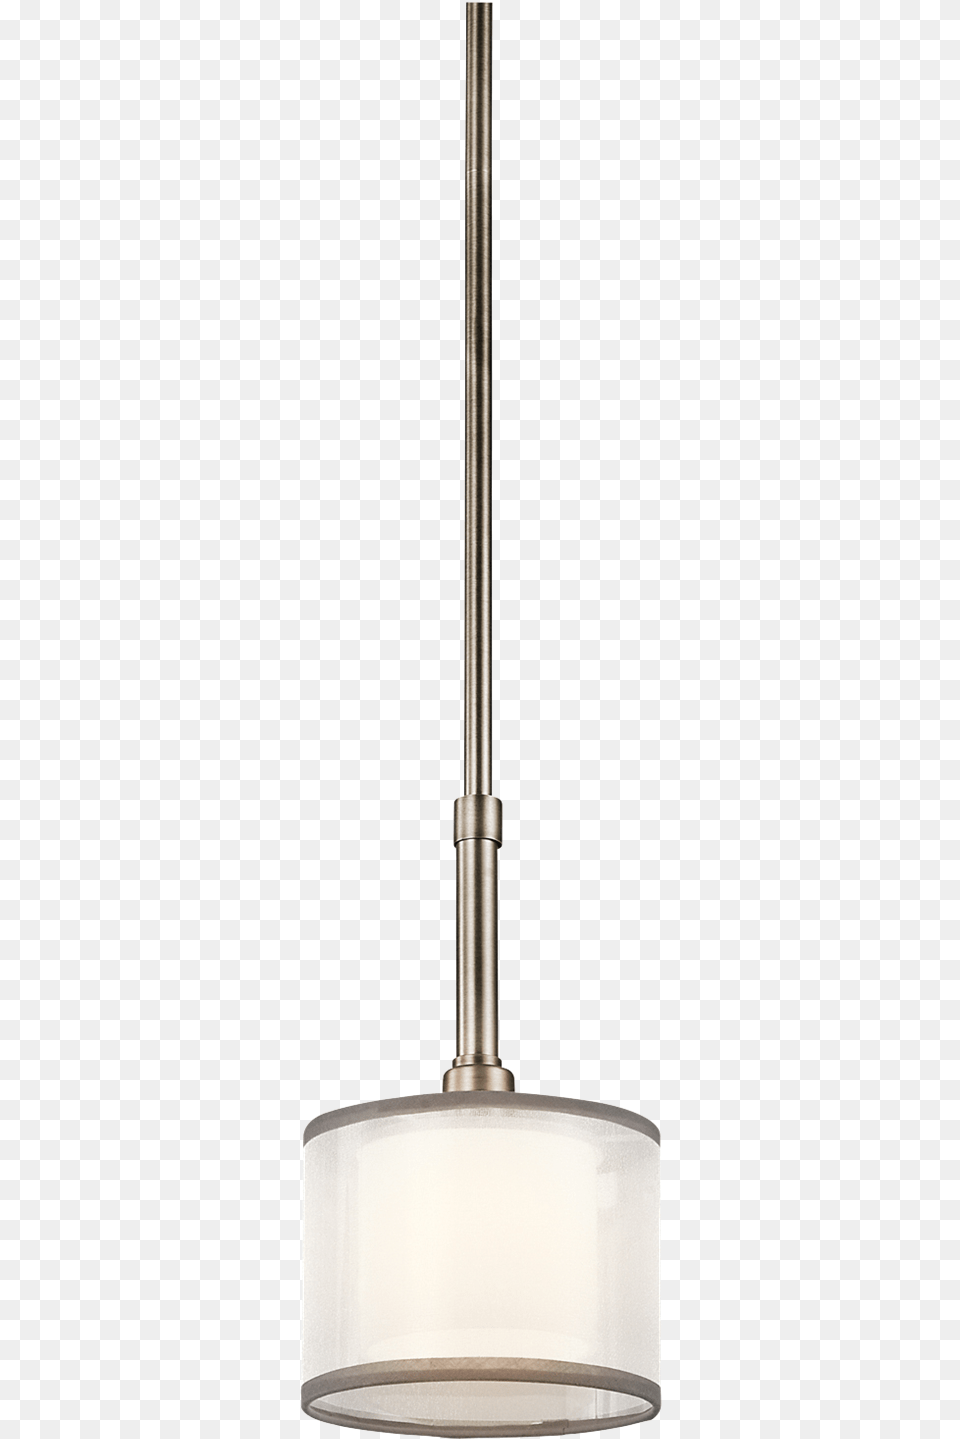 Fabulous Mini Pendant Lights In Lacey Collection 1 Kichler Lighting Lacey Mini Pendant Antique, Lamp Free Png Download